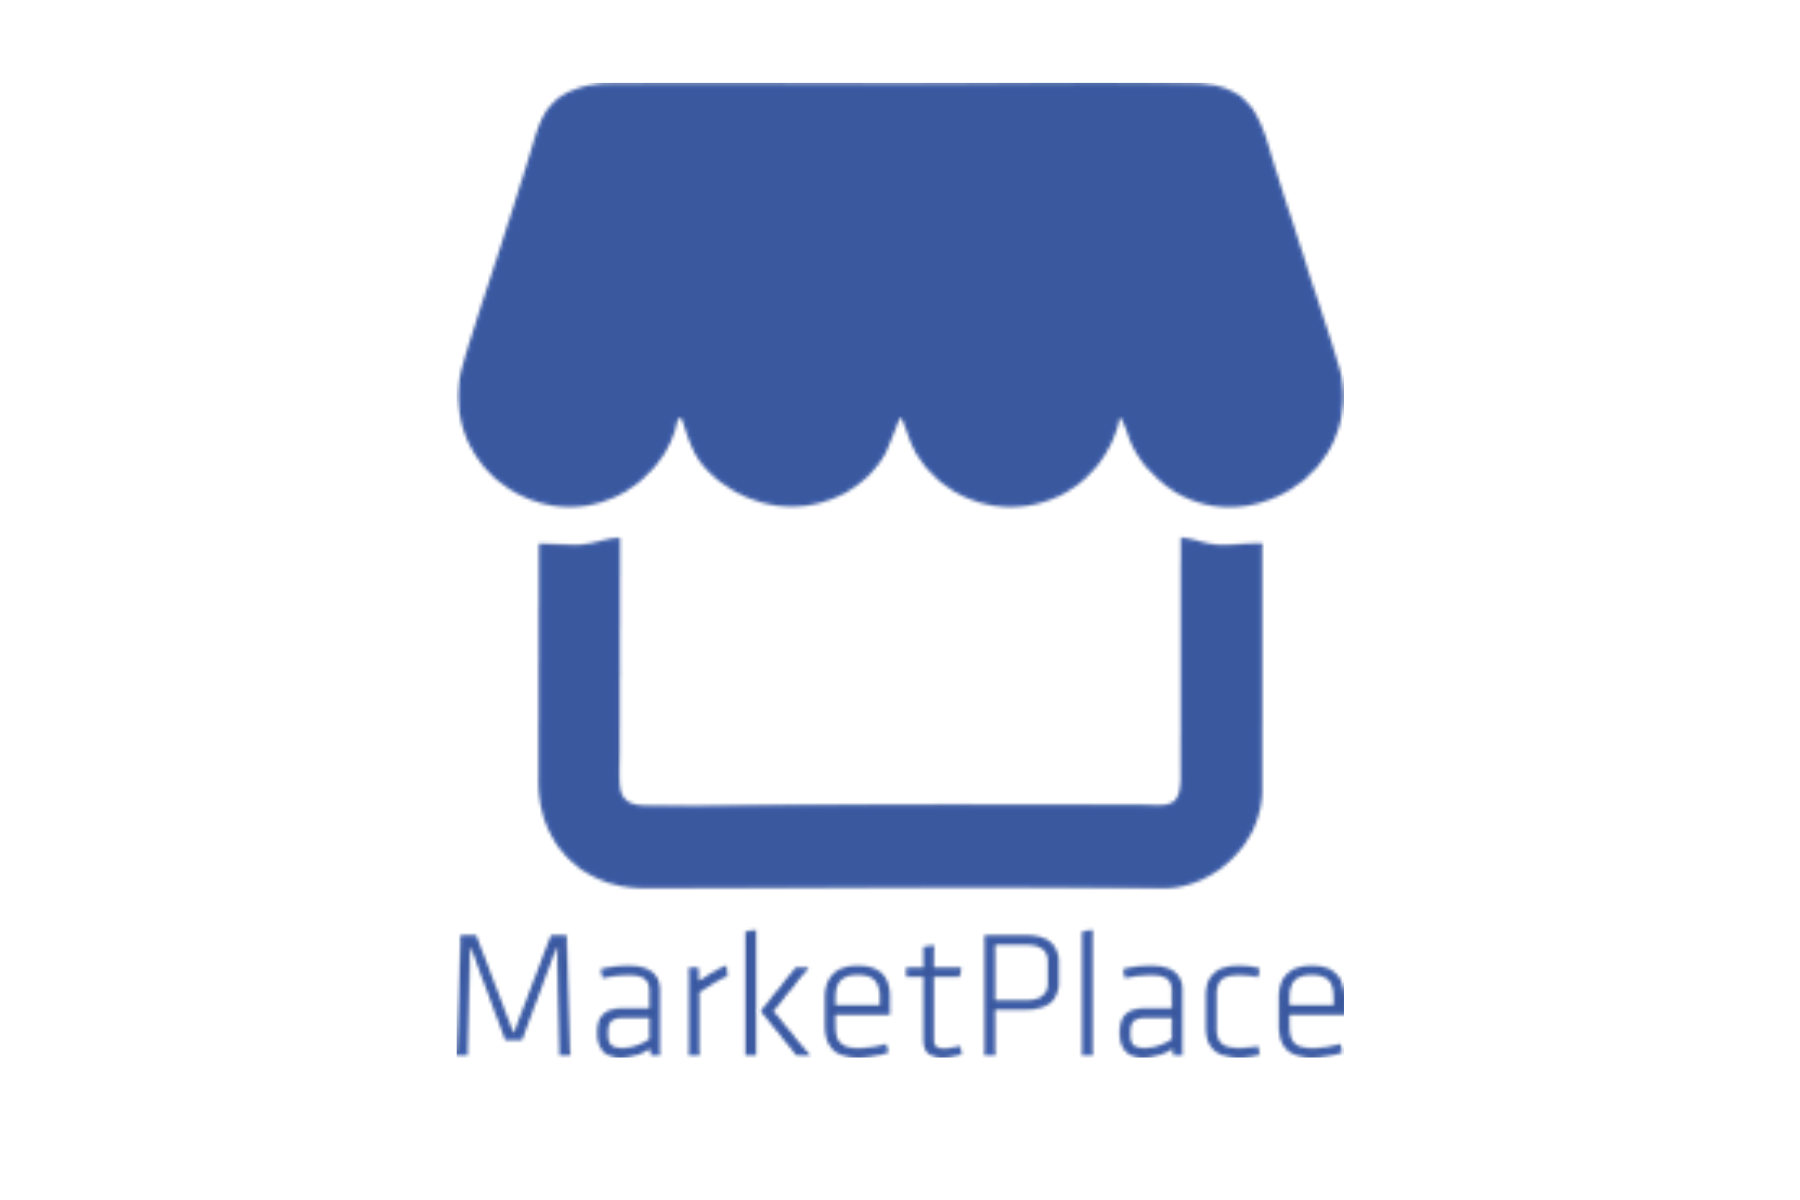 A Facebook MarketPlace logo with a blue house and a roof